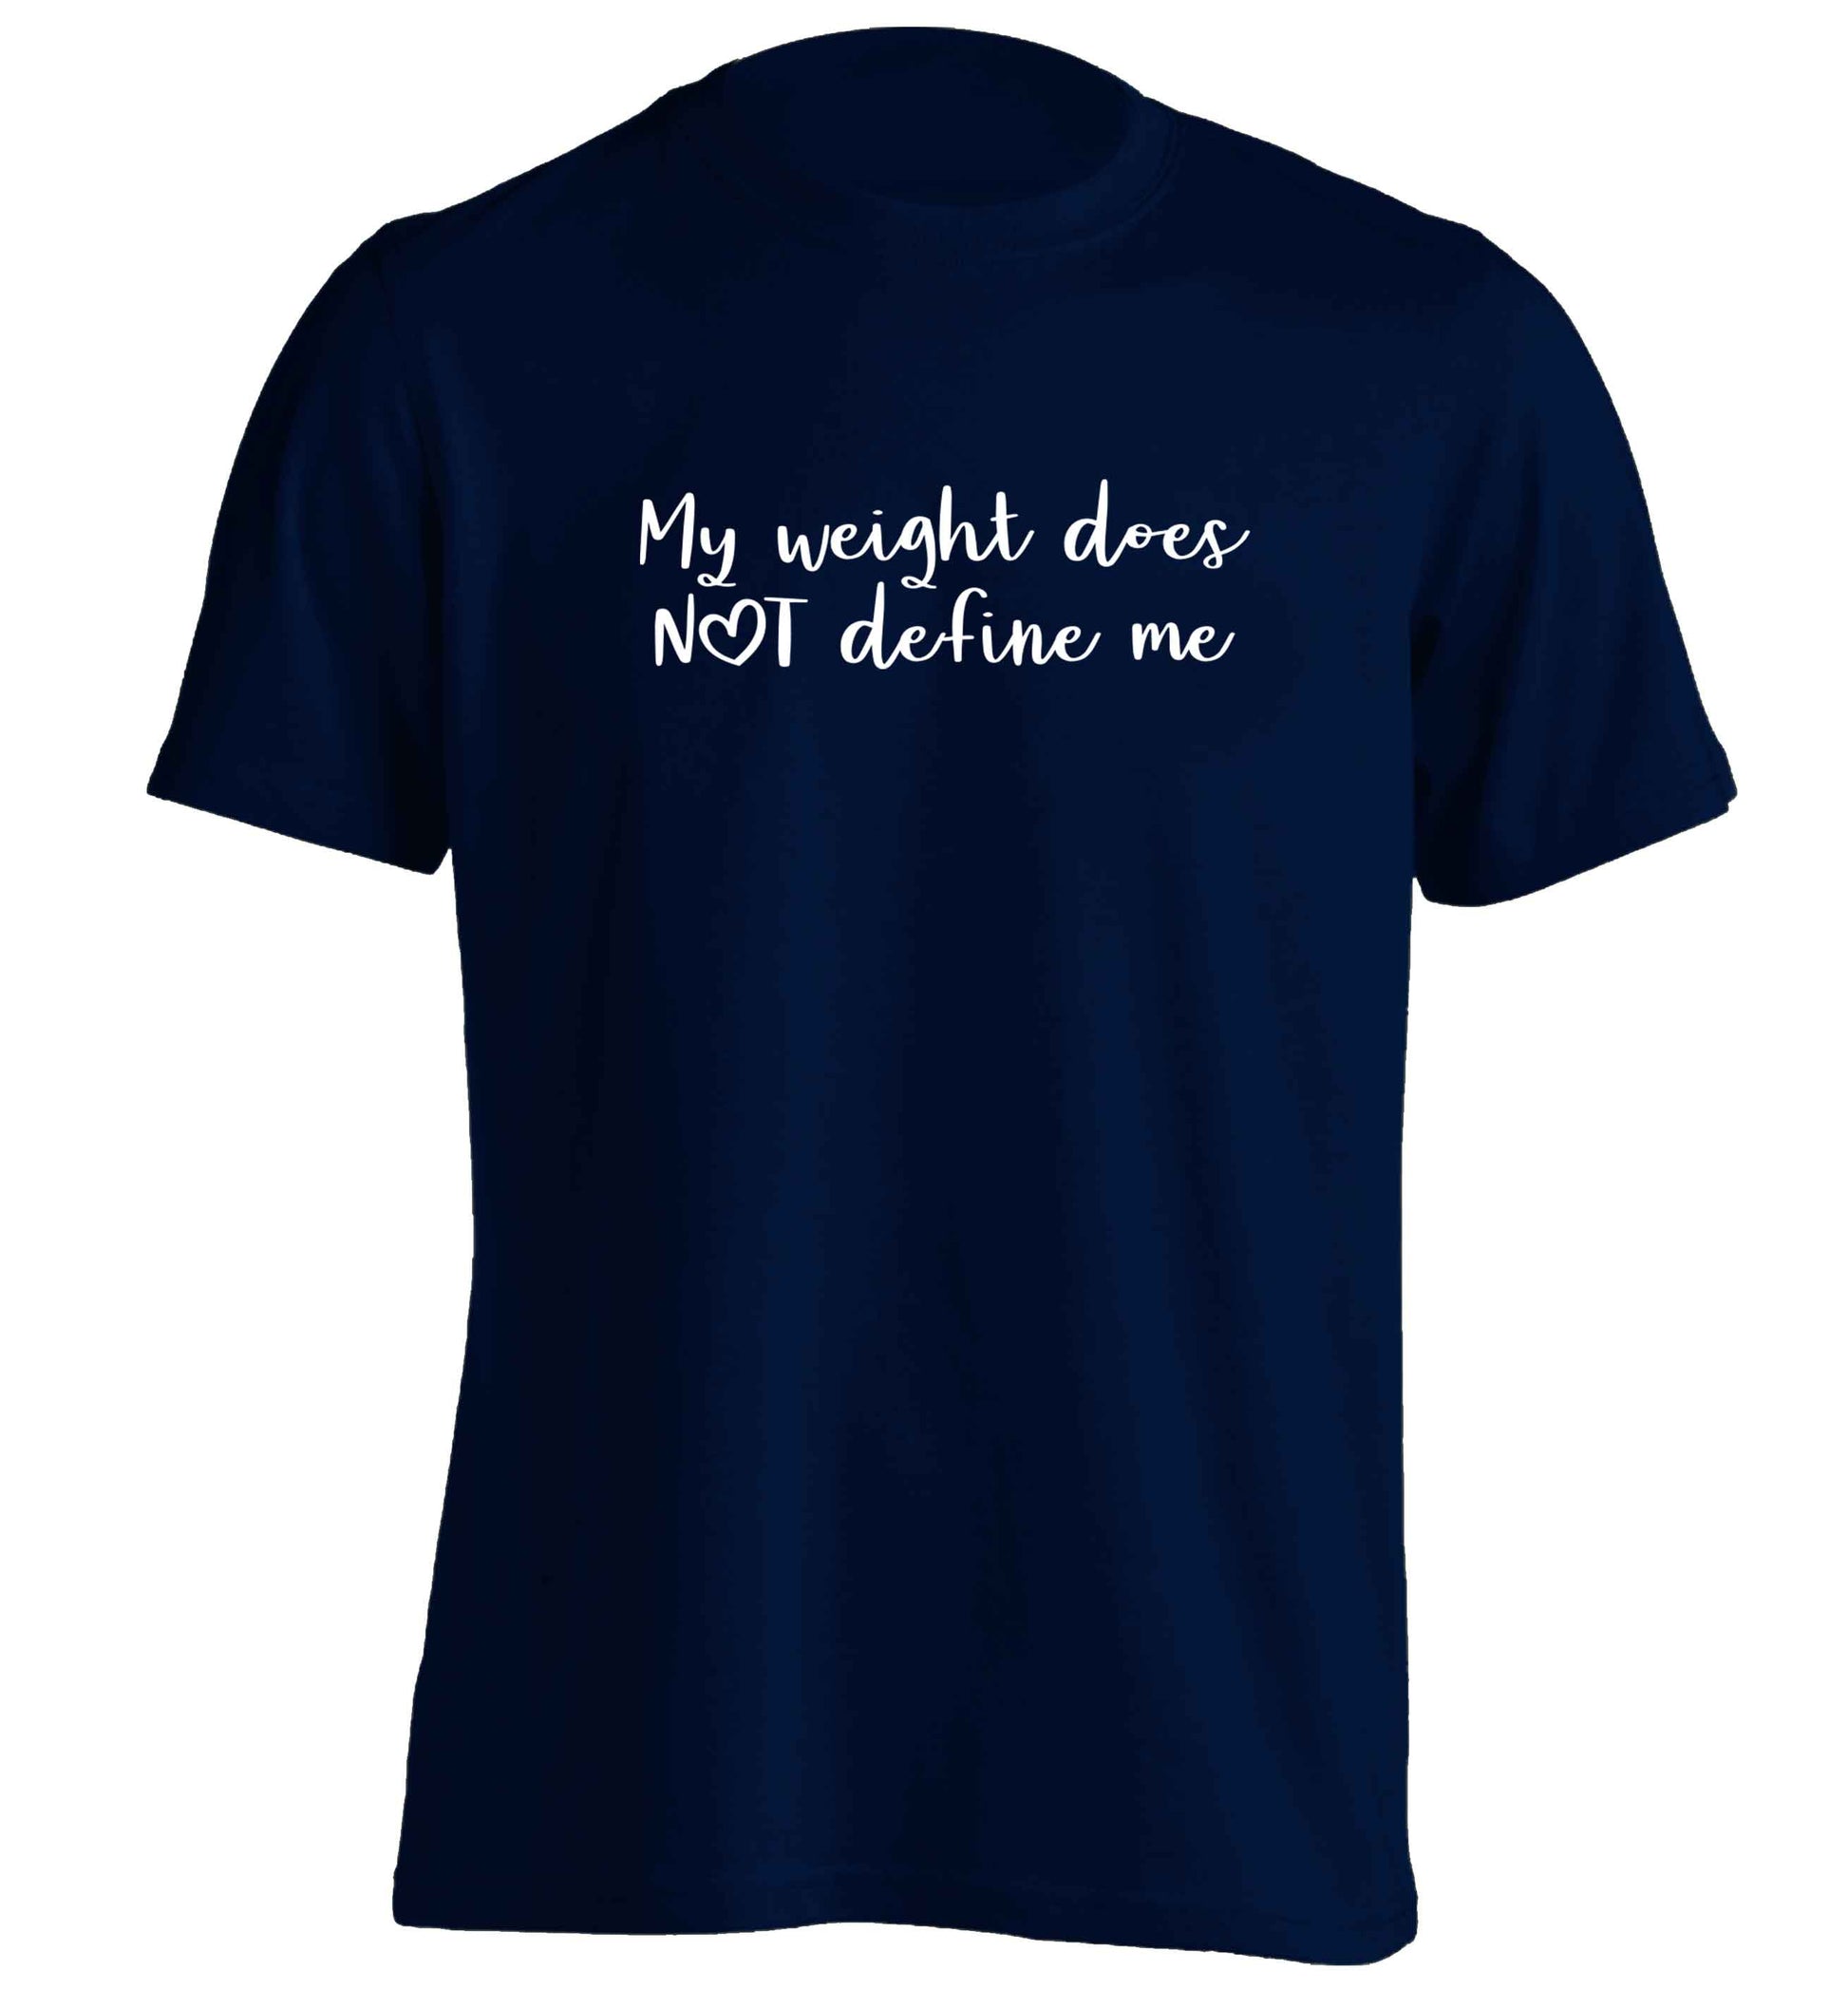 My weight does not define me adults unisex navy Tshirt 2XL